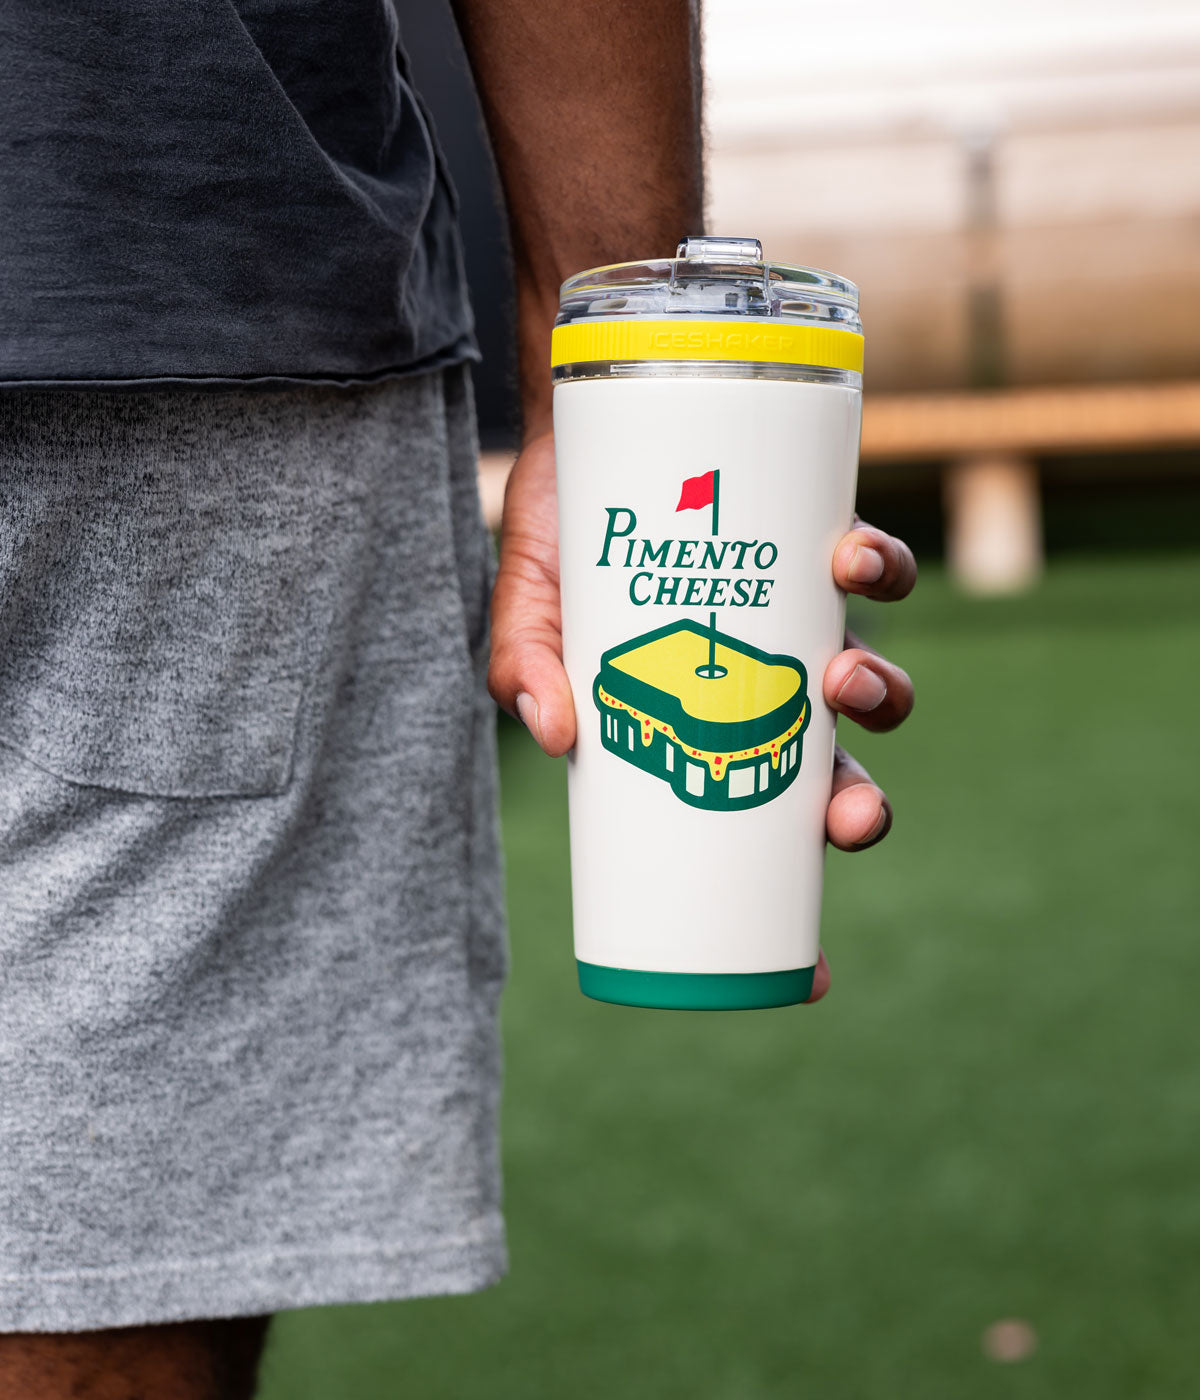 This image shows the Golf Series Pimento Cheese 26oz Flex Bottle being held by a hand. There is greenery in the background.